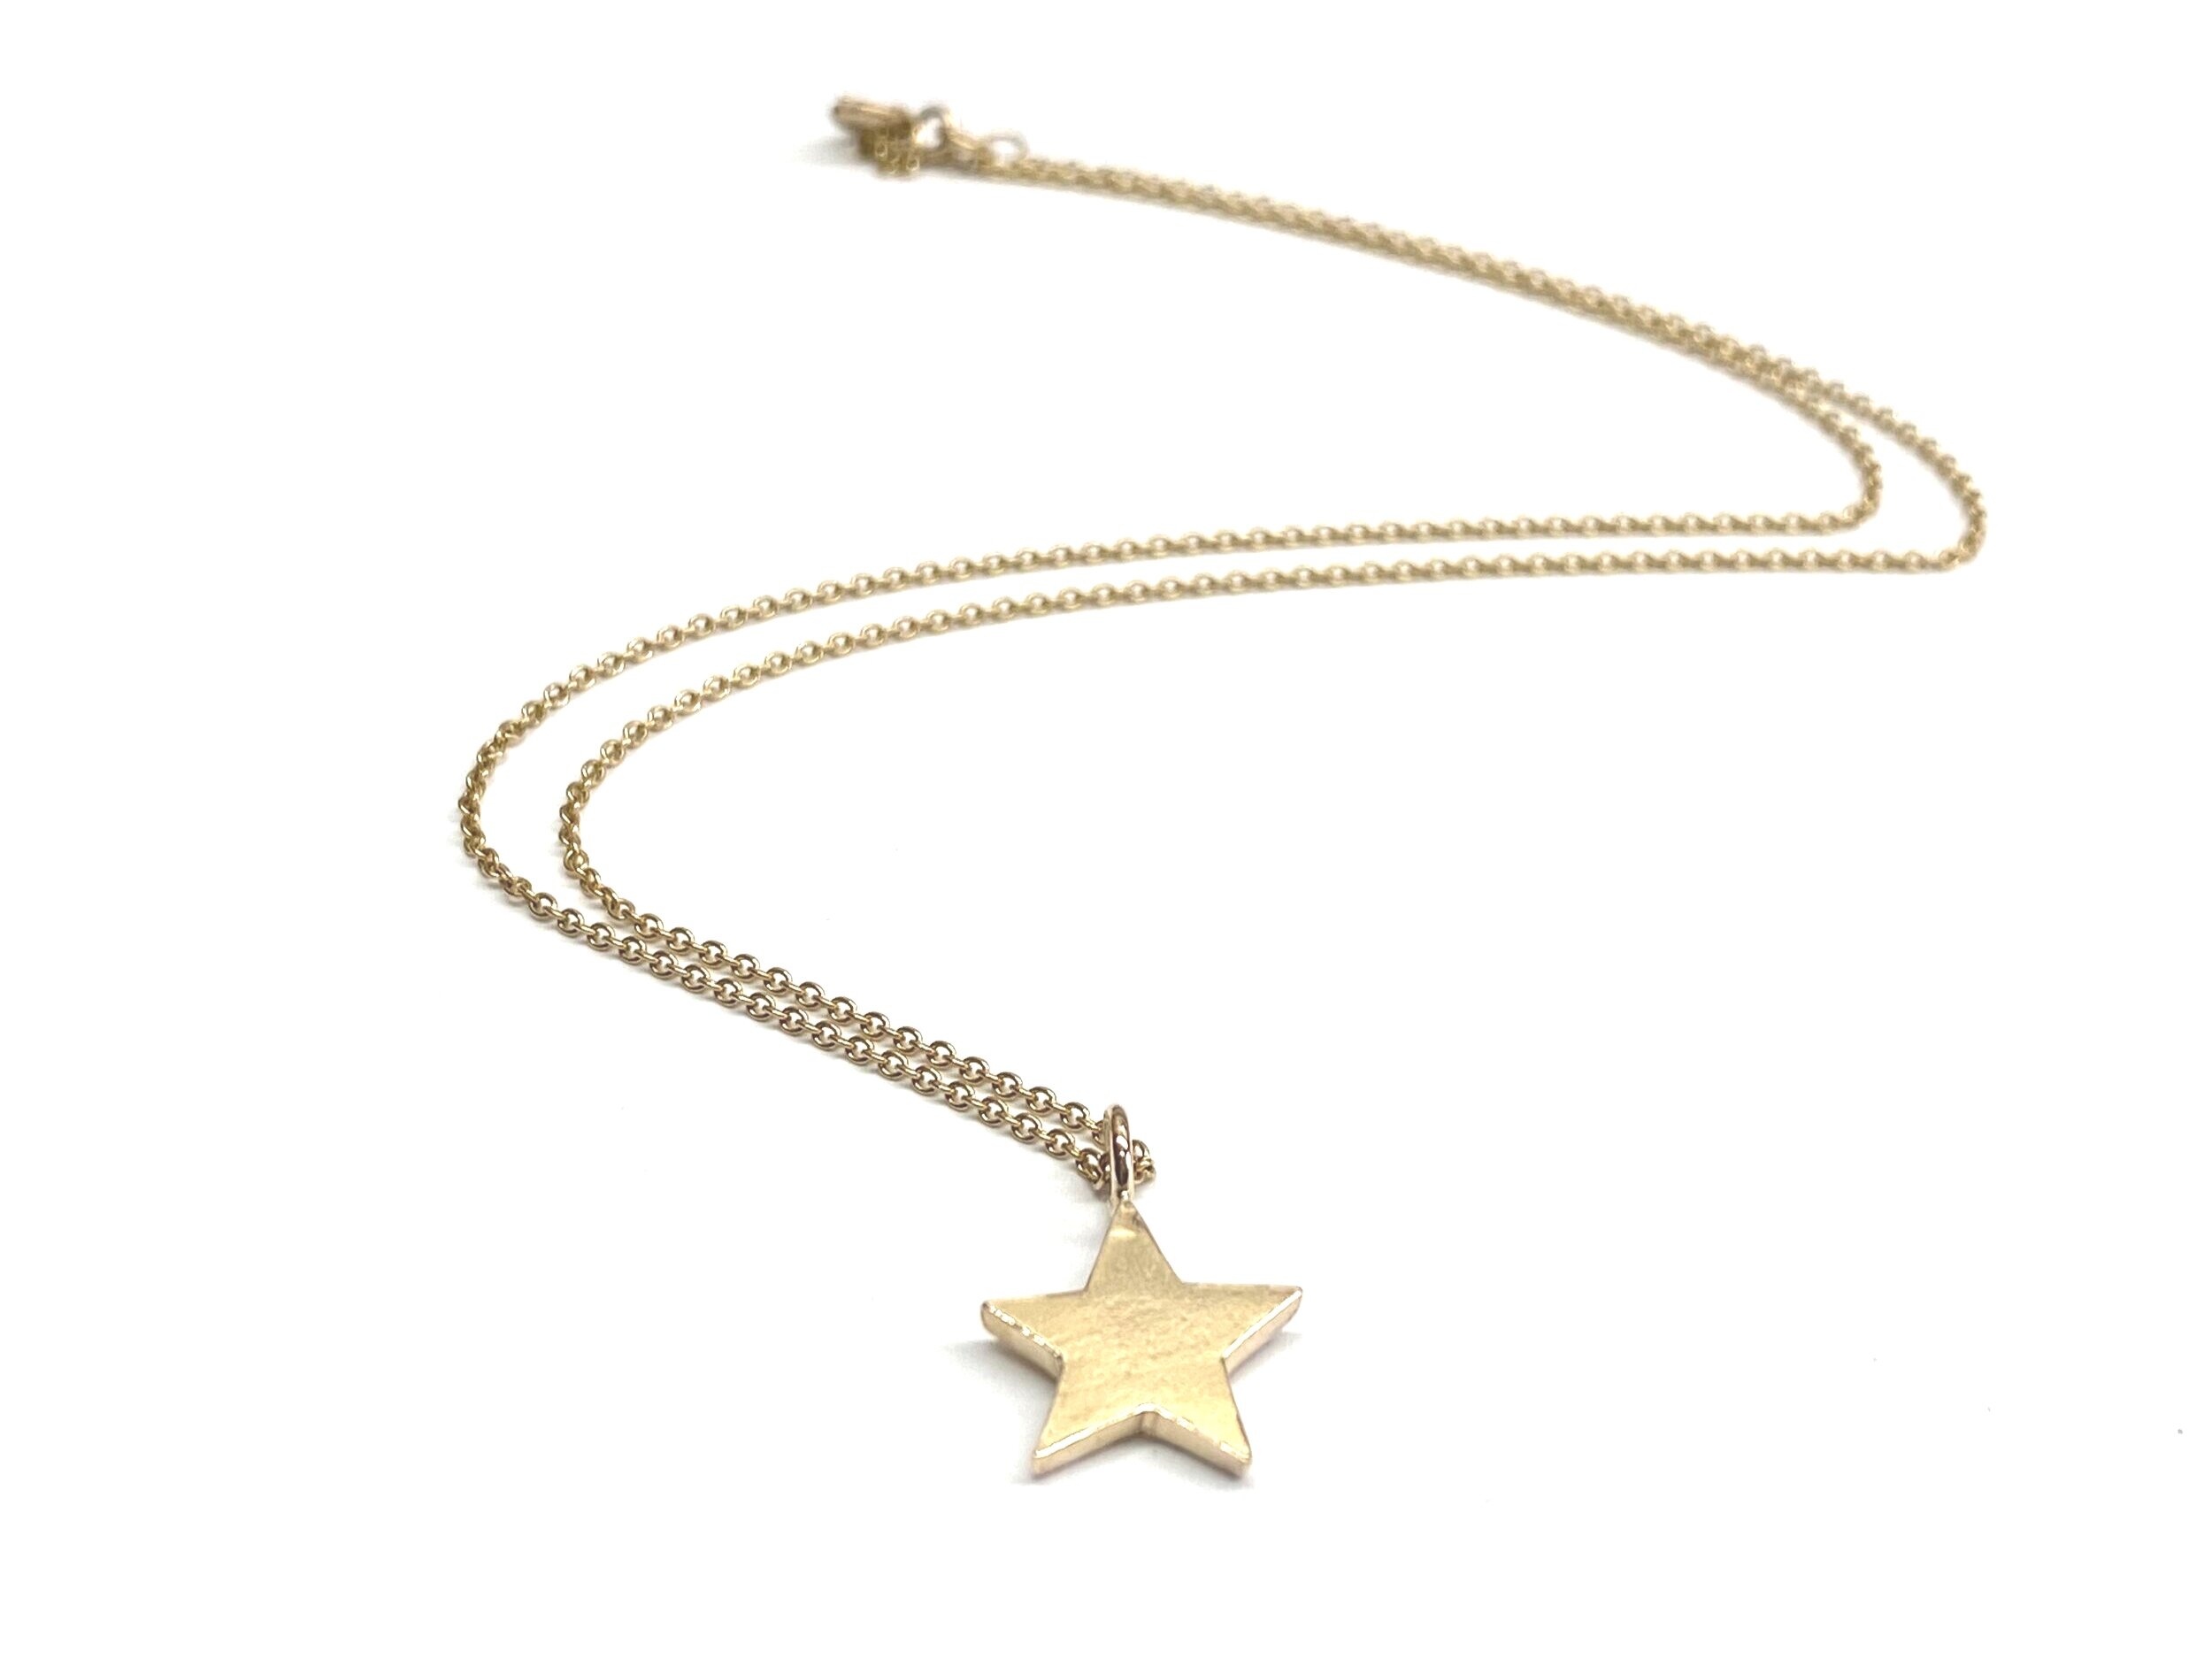 Gold Star Necklace, 9ct Yellow Gold, Star Jewellery, Polished Finish,  Celestial Jewellery, Birthday Gifts, Gifts for Her, Handmade Jewellery -  Etsy